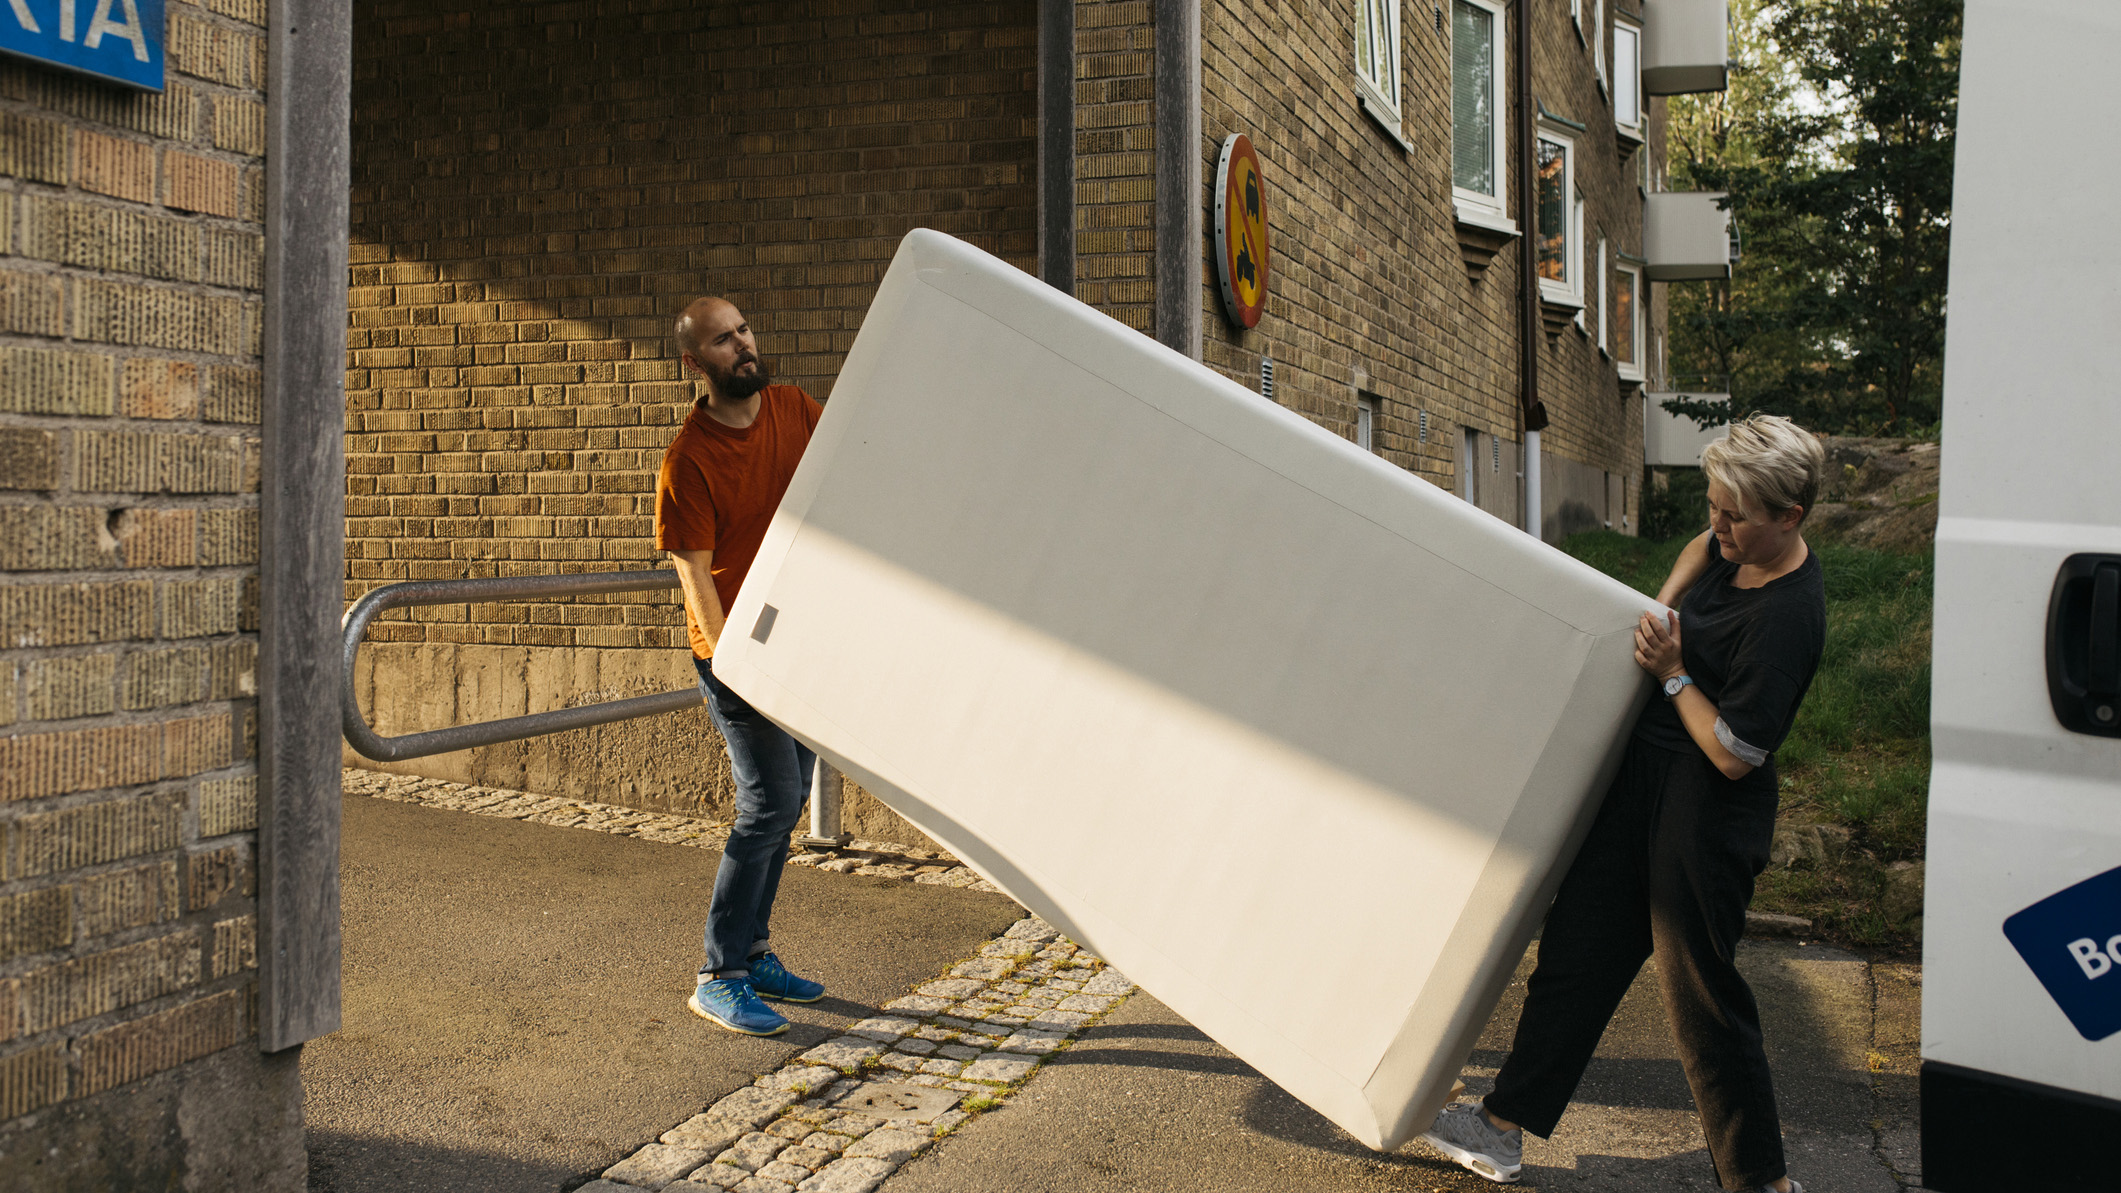 How To Return A Mattress To Amazon